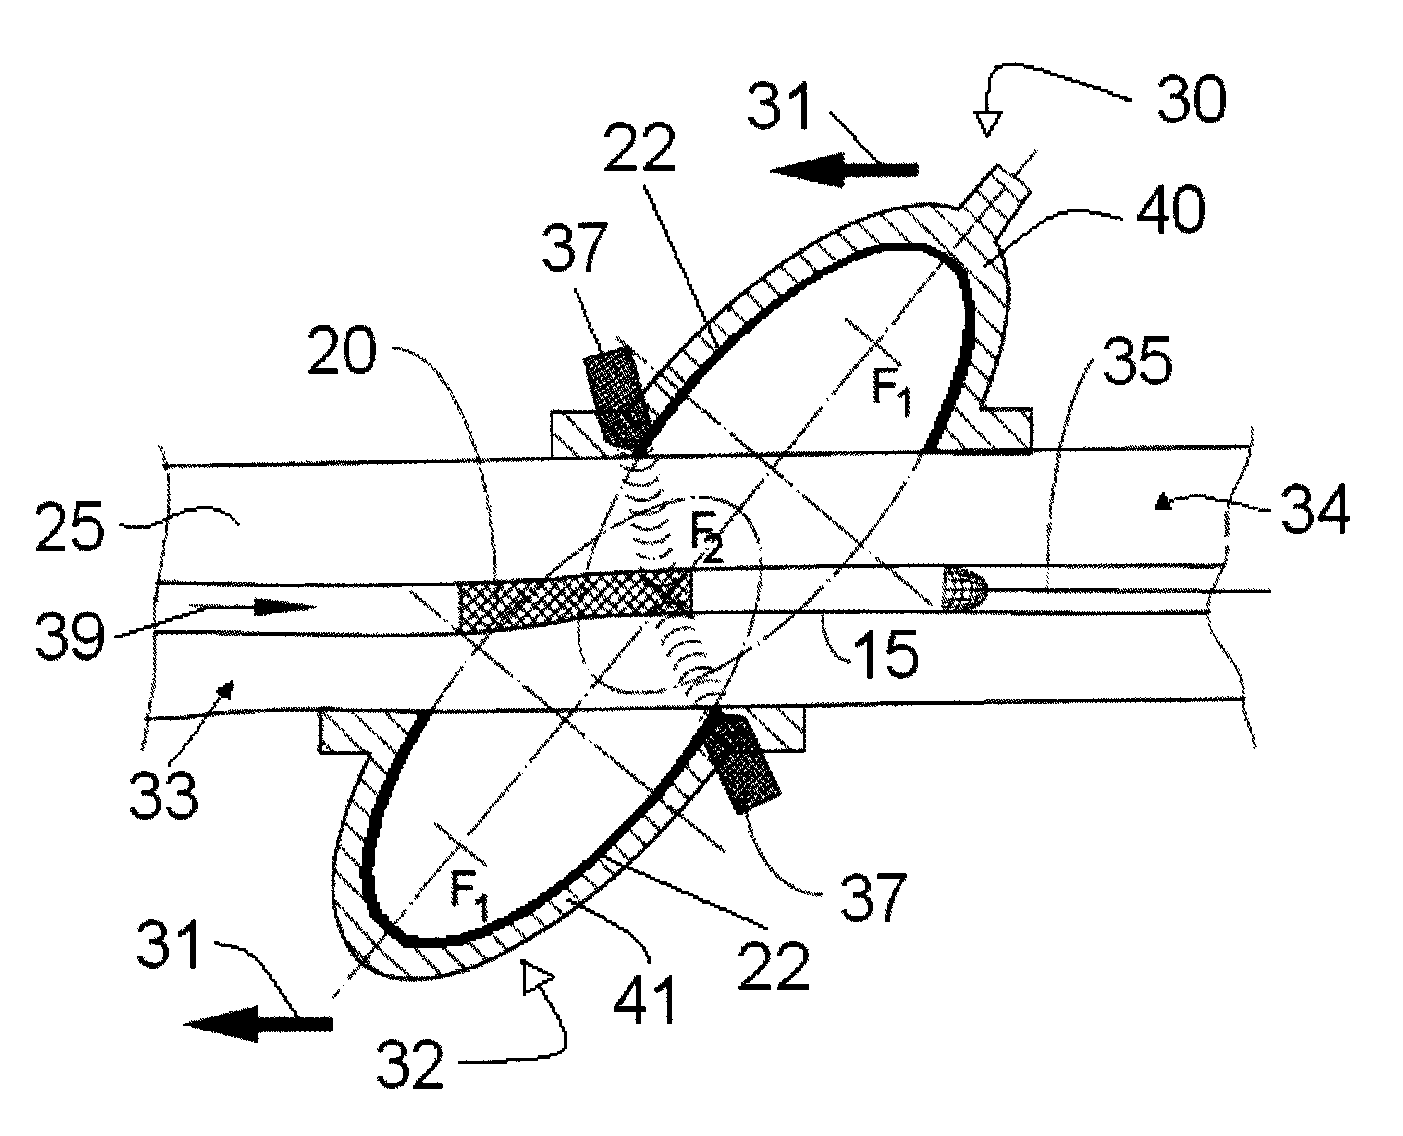 Extracorporeal pressure shock wave device